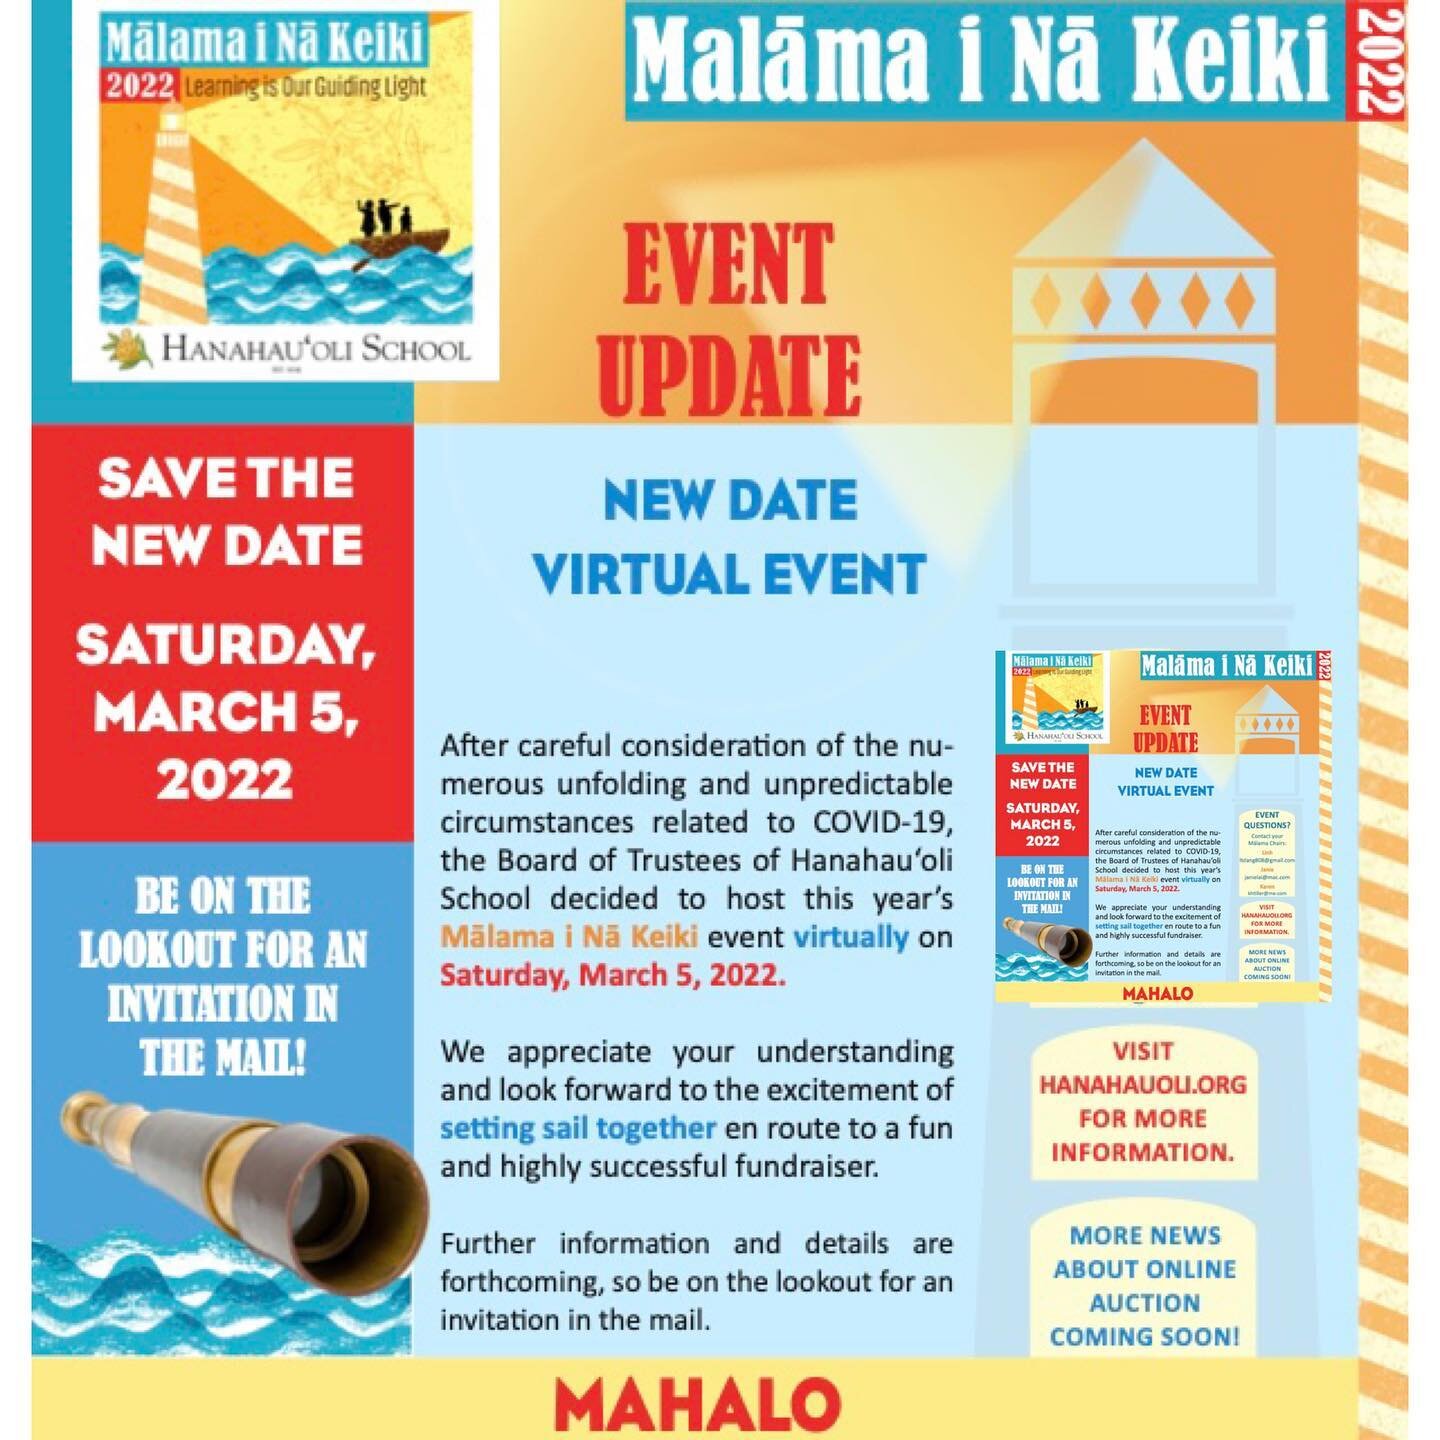 After careful consideration by our Board of Trustees, Mālama i Nā Keiki 2022 - Learning is Our Guiding Light is going virtual. Save the new date of Saturday, March 5, 2022 (starting at 5 pm) and get ready for some fun!